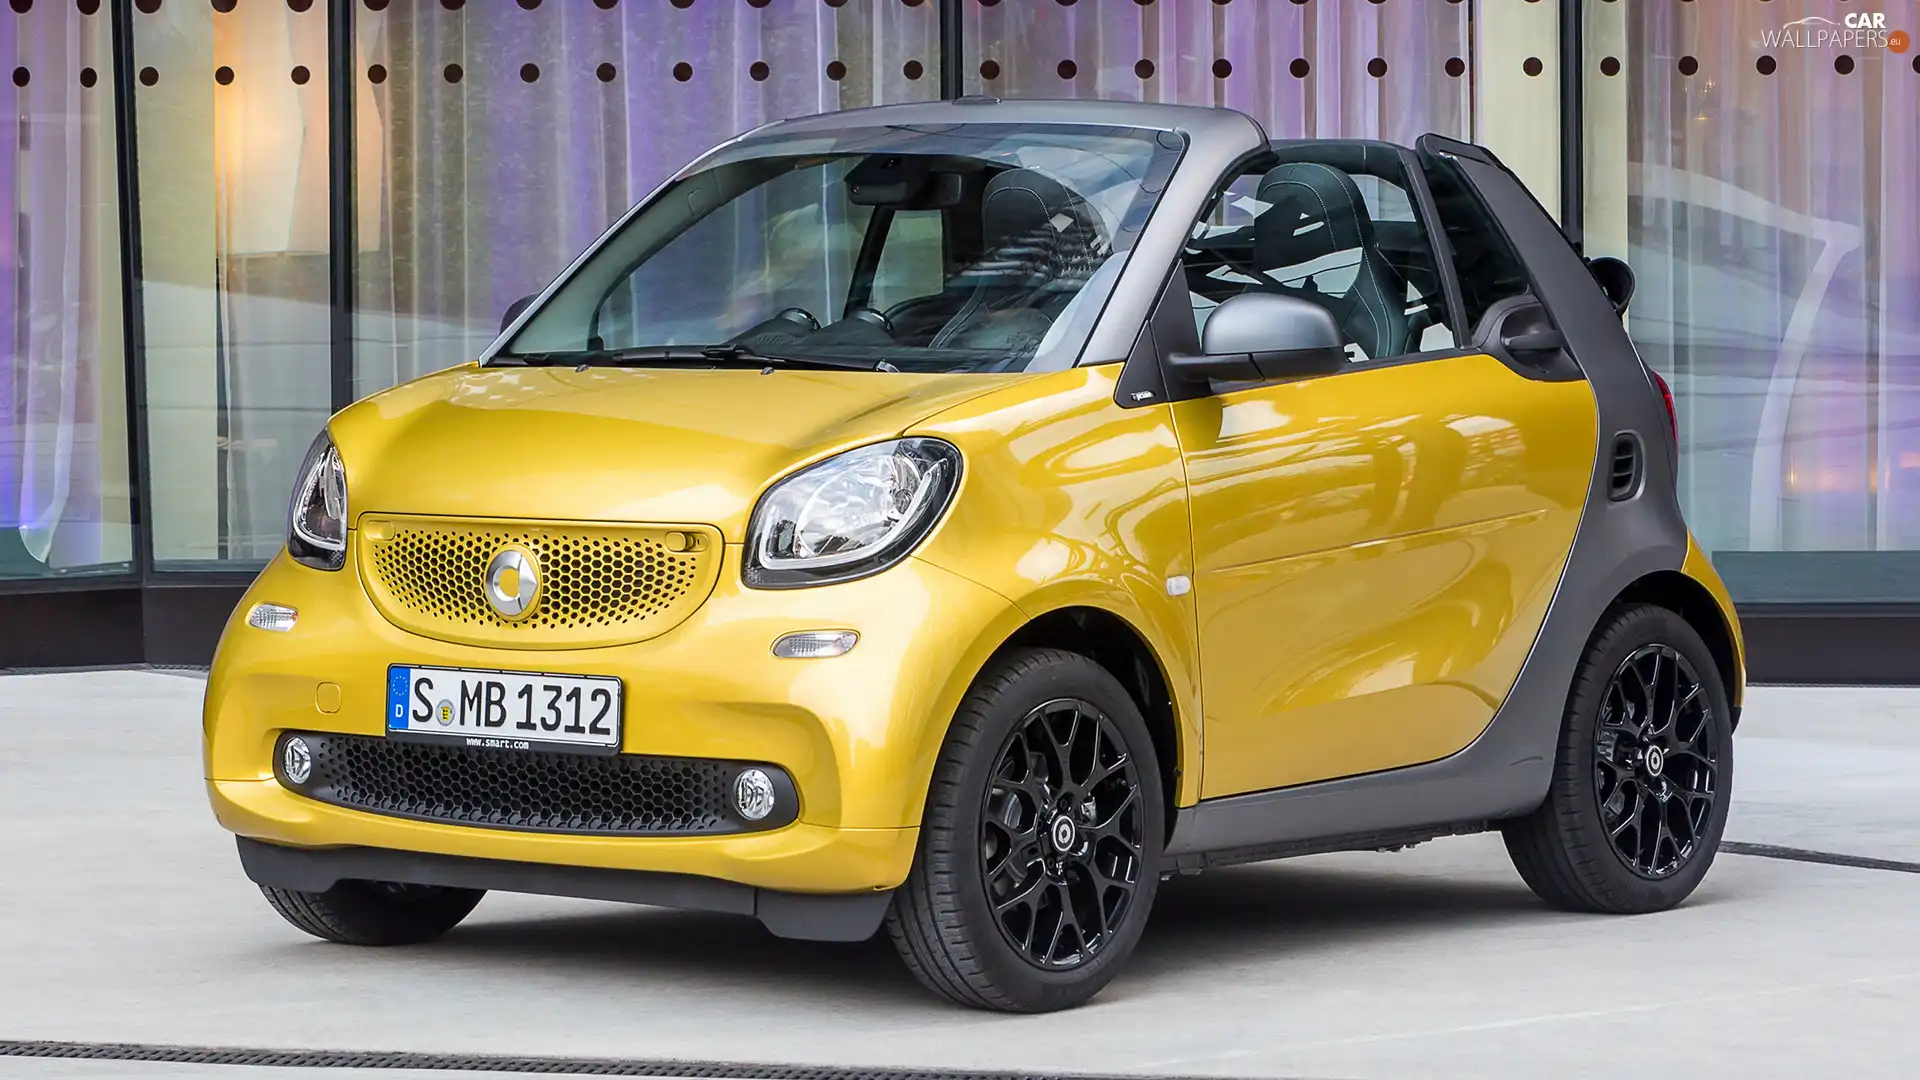 Cabrio, Yellow, Smart Fortwo - Cars Wallpapers: 1920x1080